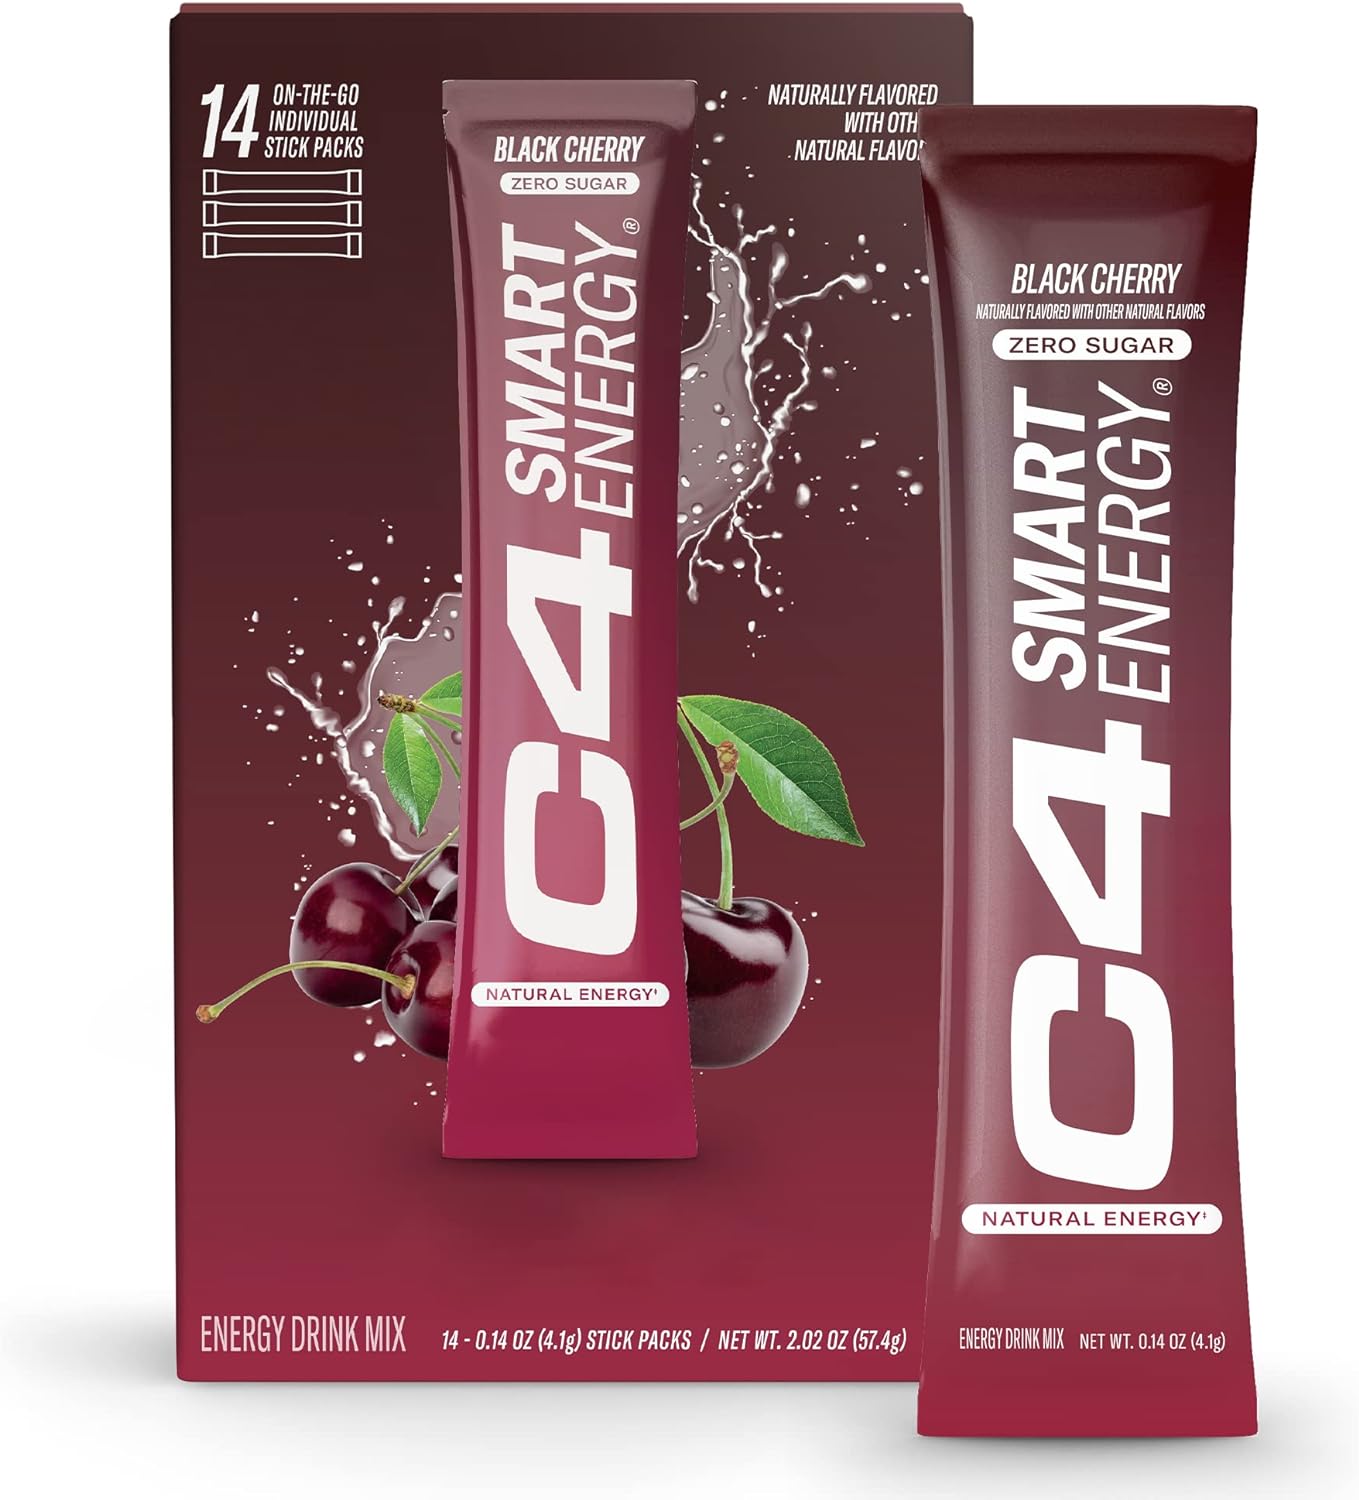 C4 Smart Energy Powder Stick Packs - Sugar Free Performance Fuel & Nootropic Brain Booster, Coffee Substitute or Alternative | Black Cherry - 14 Count